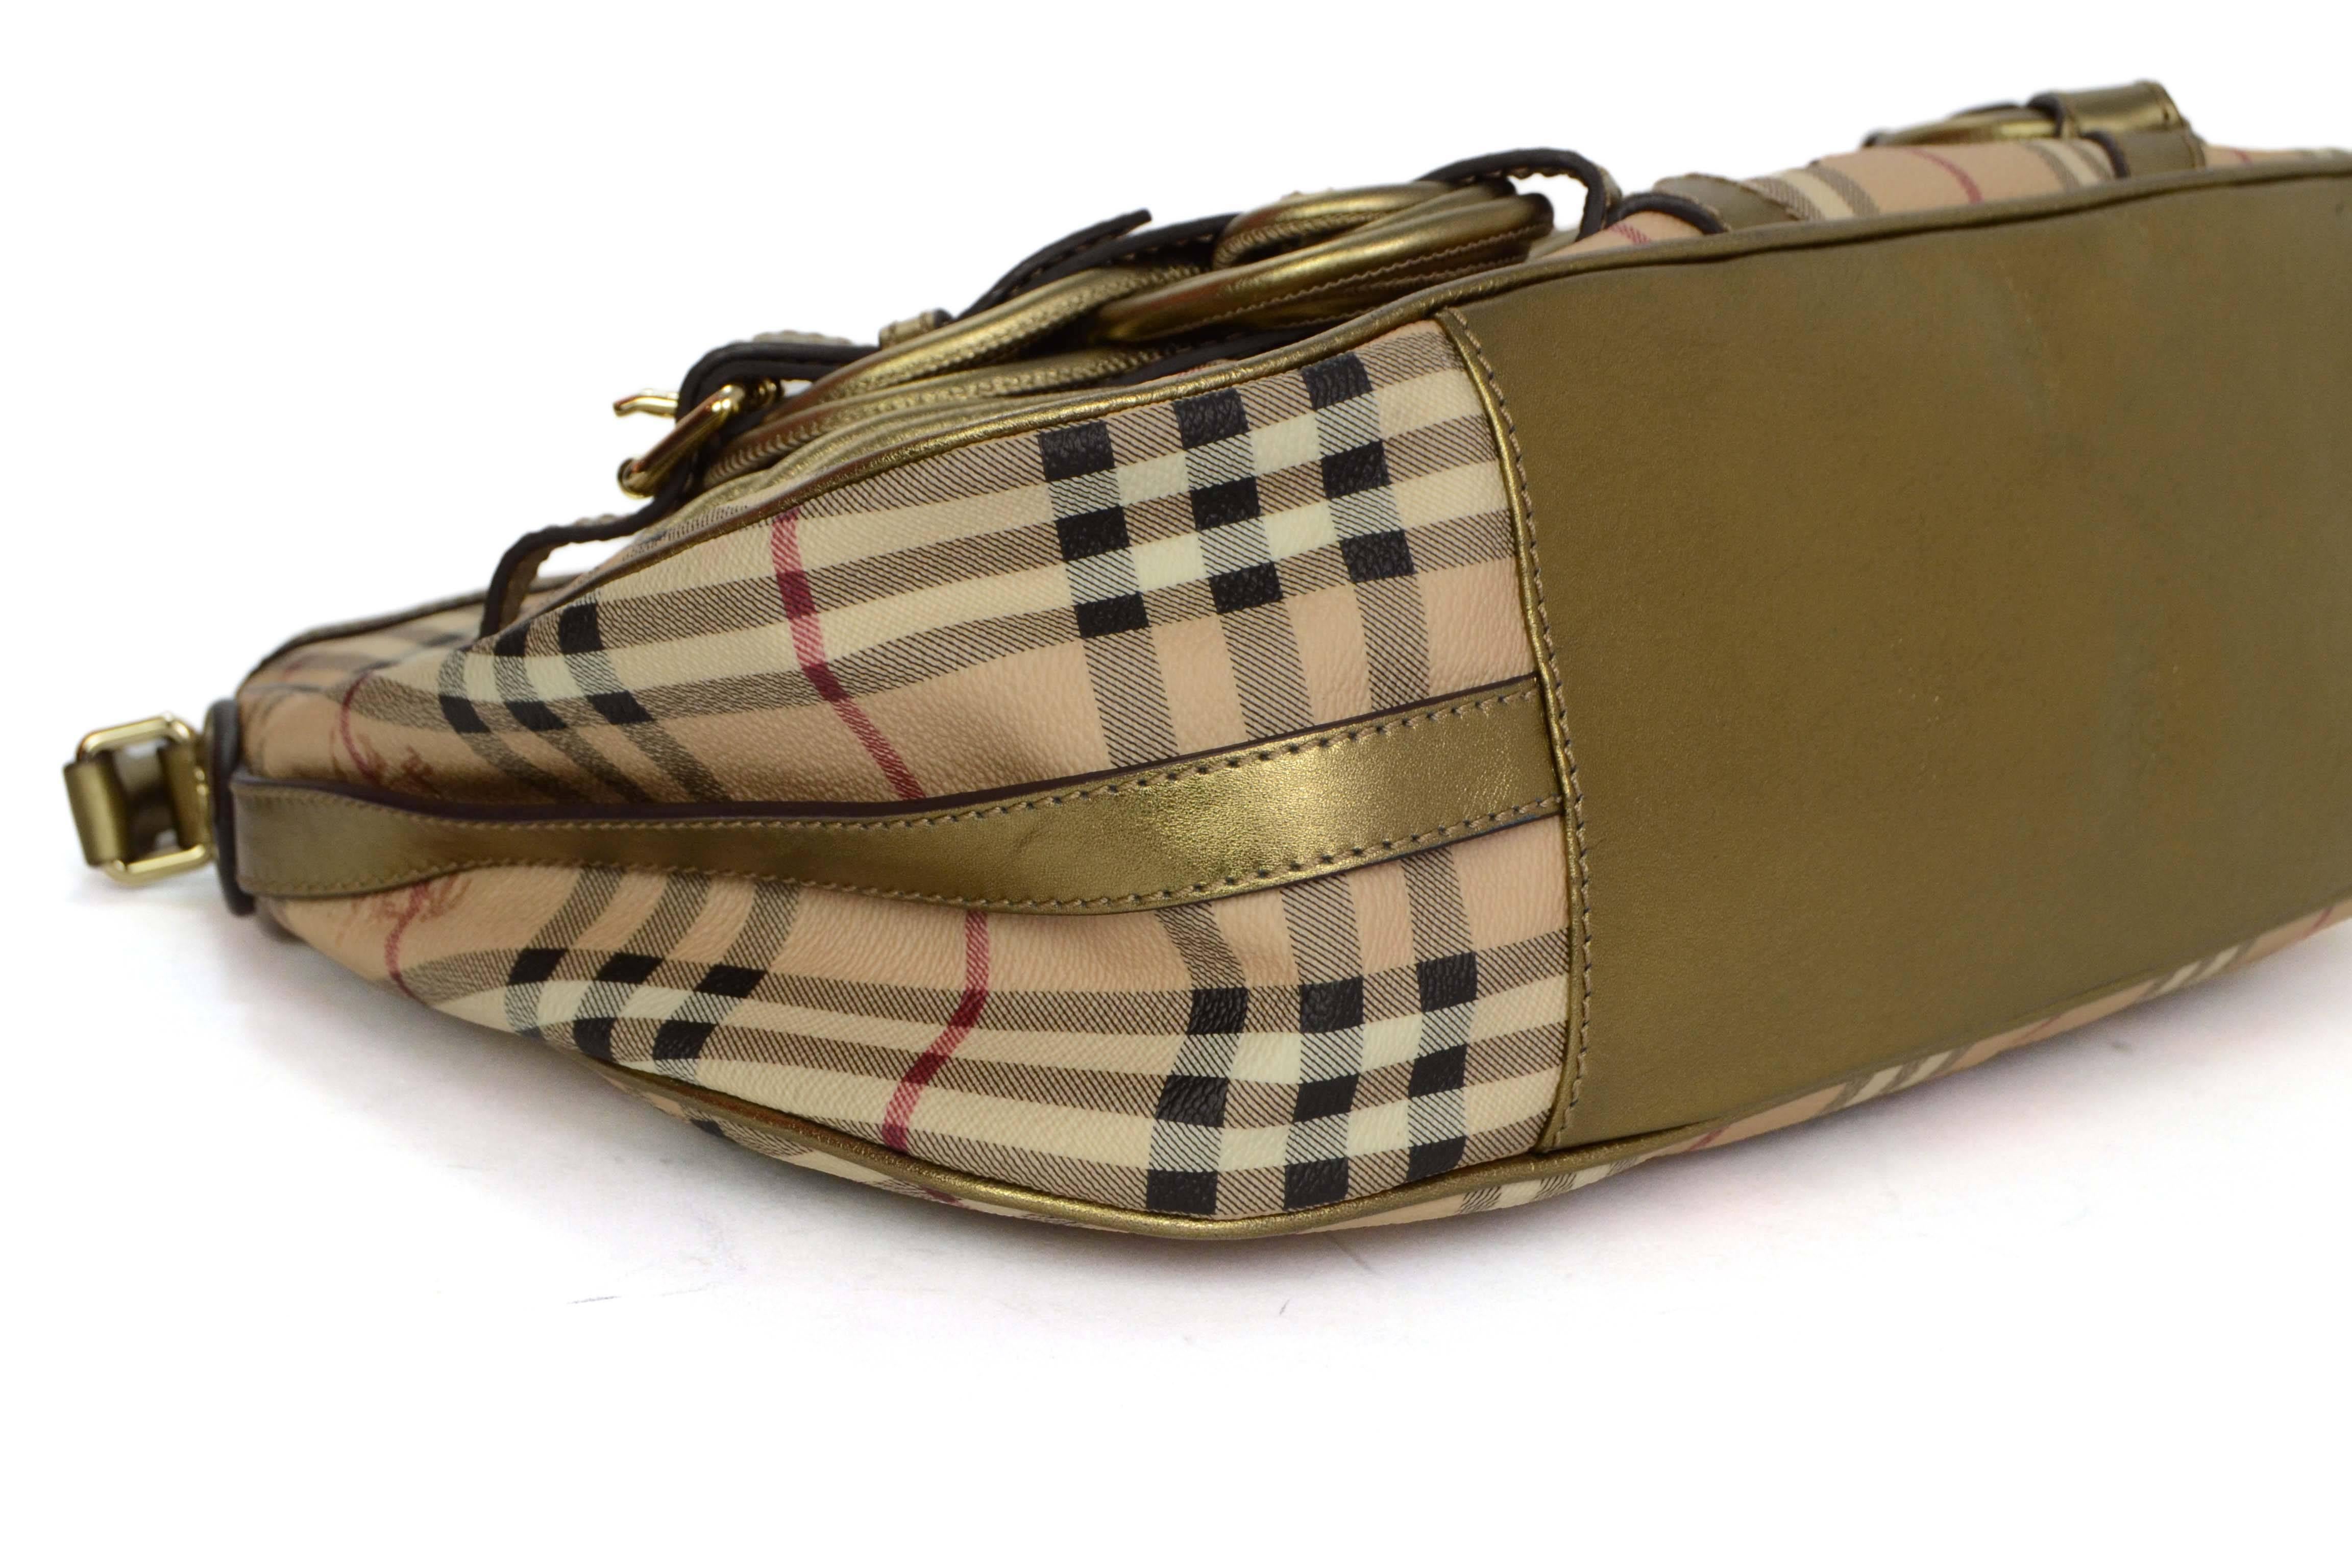 Features Buberry's classic nova plaid with bronze leather trim.  Woven leather by base of bag adds a unique flare to this classic style.

-Made In: Italy
-Color: Tan with black, burgundy and cream plaid
-Hardware: Goldtone
-Materials: Canvas